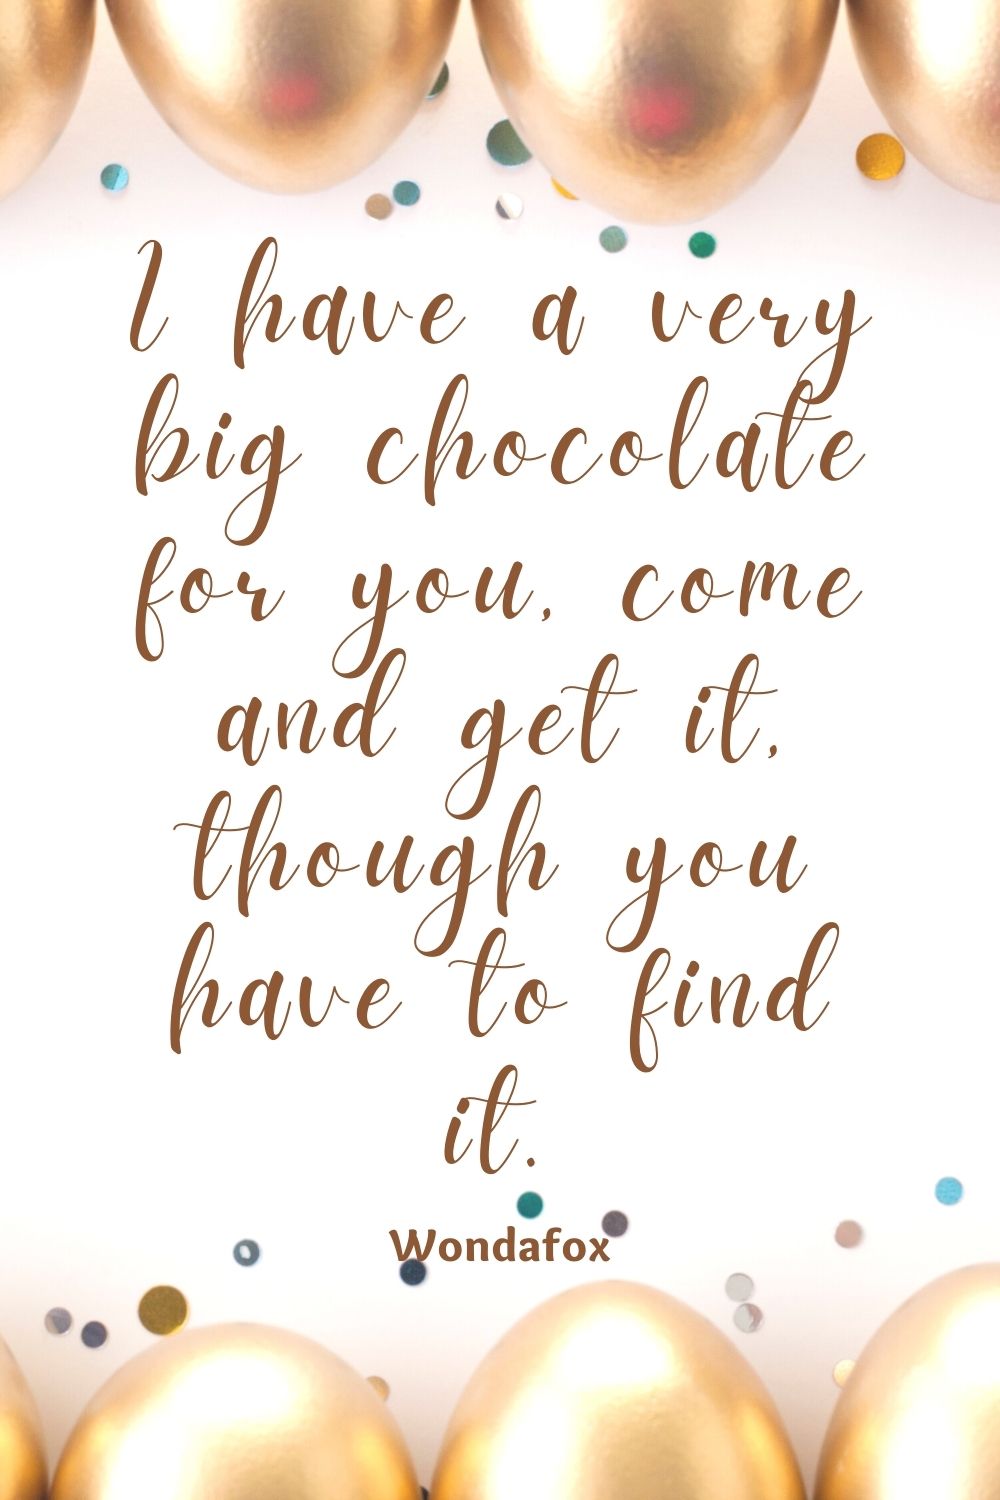 I have a very big chocolate for you, come and get it, though you have to find it.